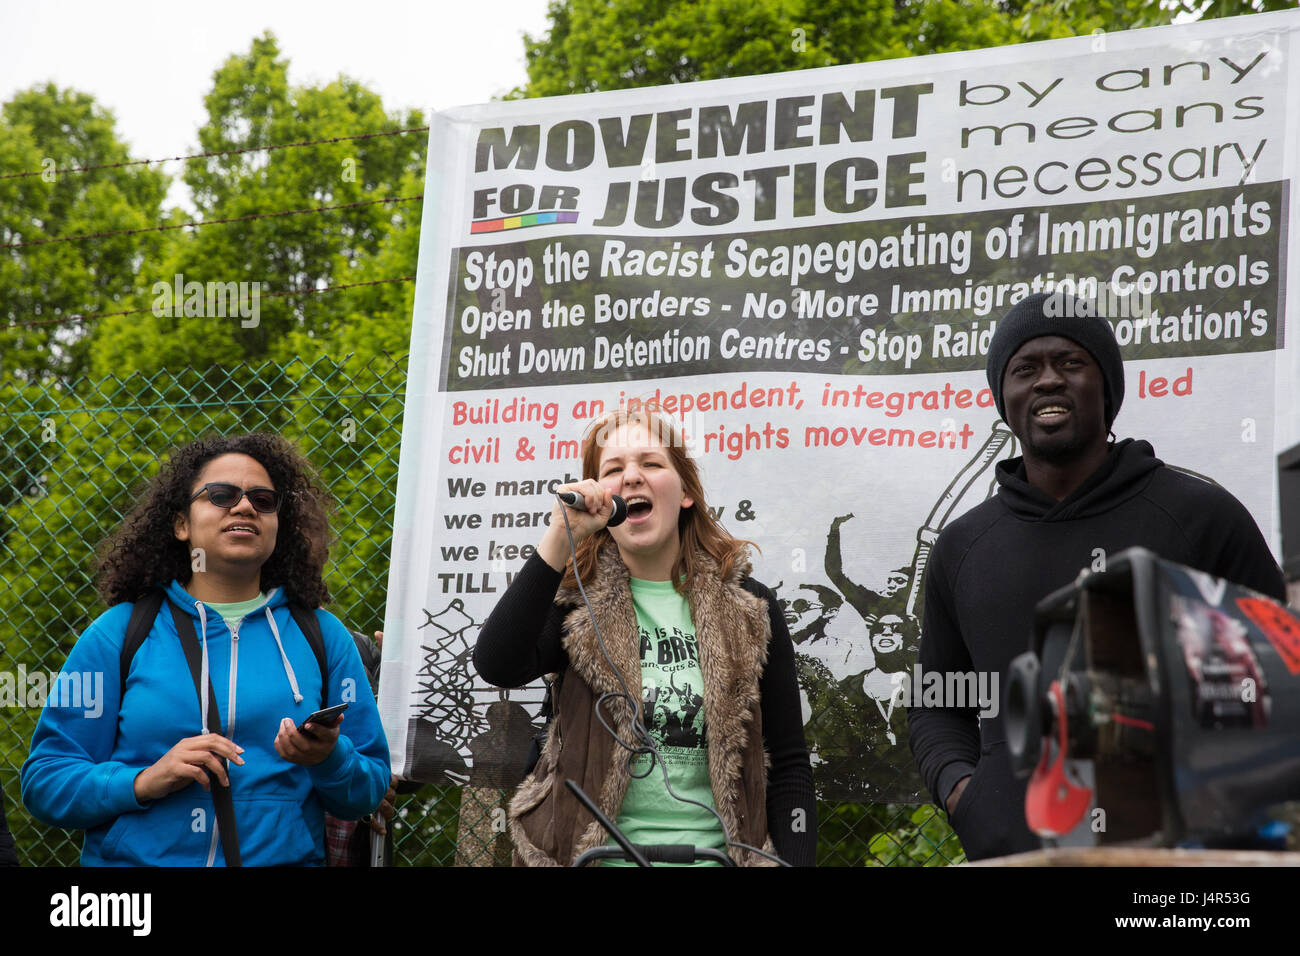 Milton Ernest, UK. 13th May, 2017. Activists from Movement For Justice By Any Means Necessary address a large protest outside Yarl's Wood Immigration Removal Centre to call for all immigration detention centres to be closed. Credit: Mark Kerrison/Alamy Live News Stock Photo